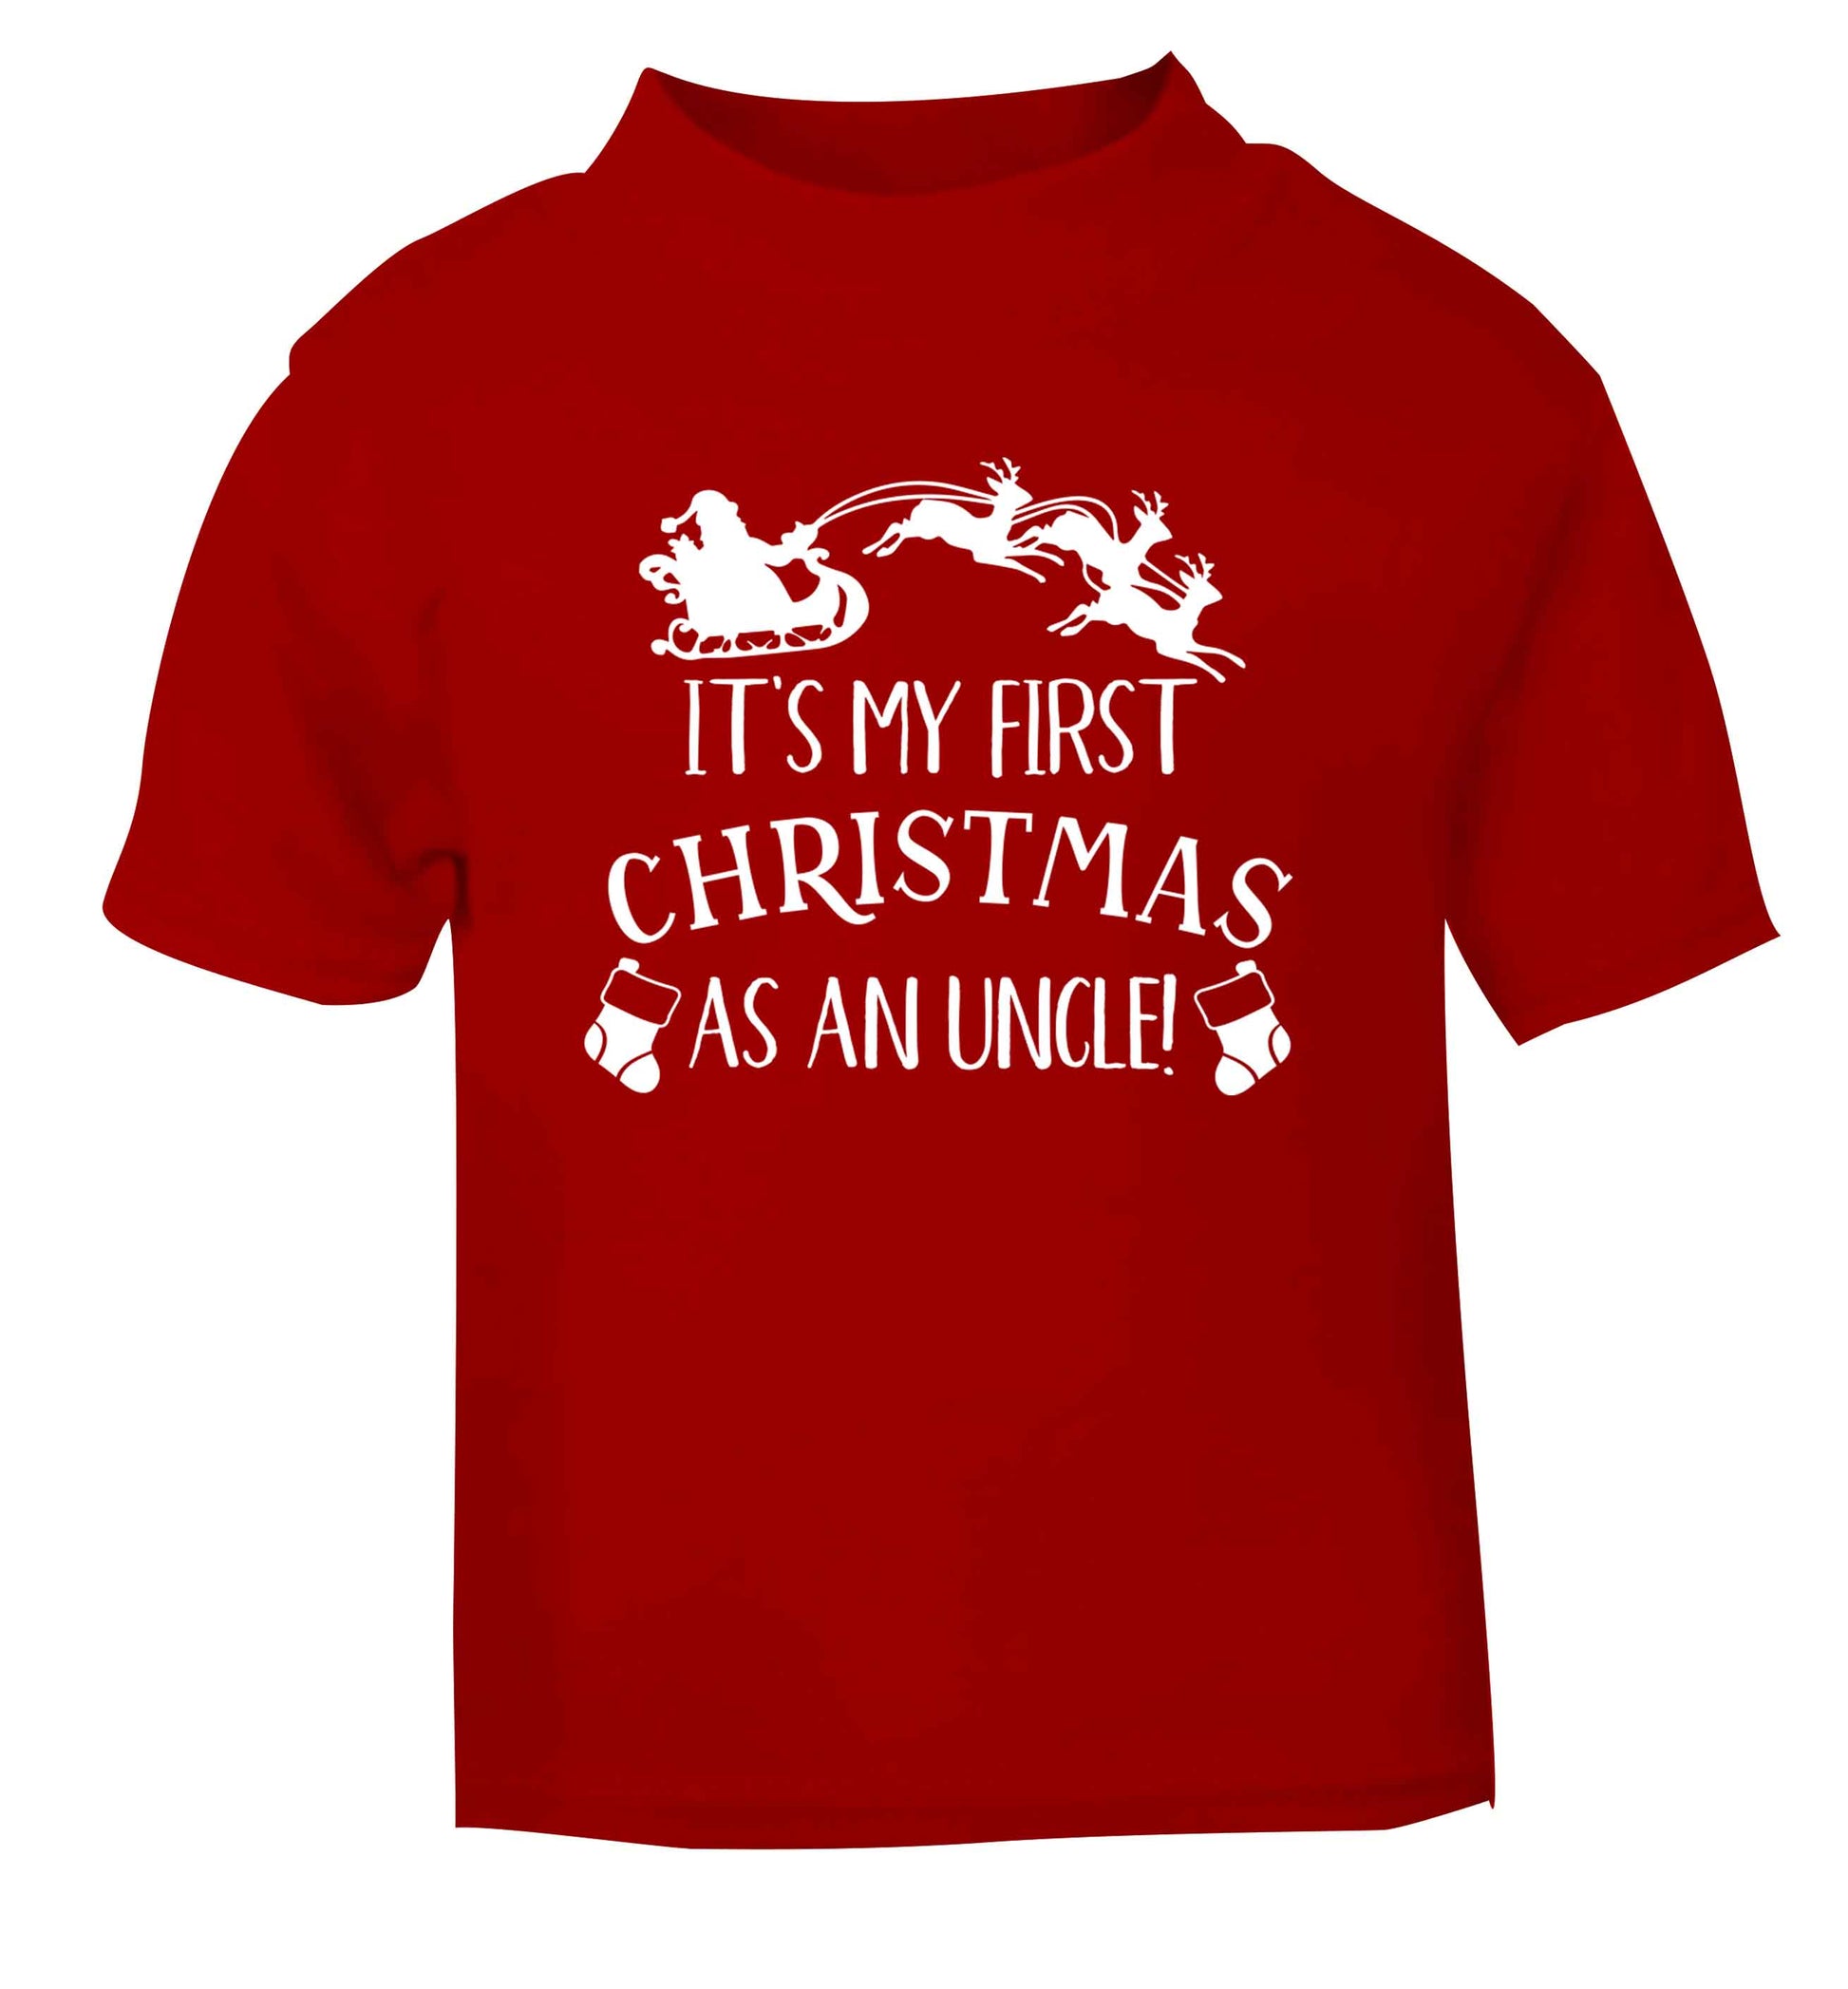 It's my first Christmas as an uncle! red Baby Toddler Tshirt 2 Years